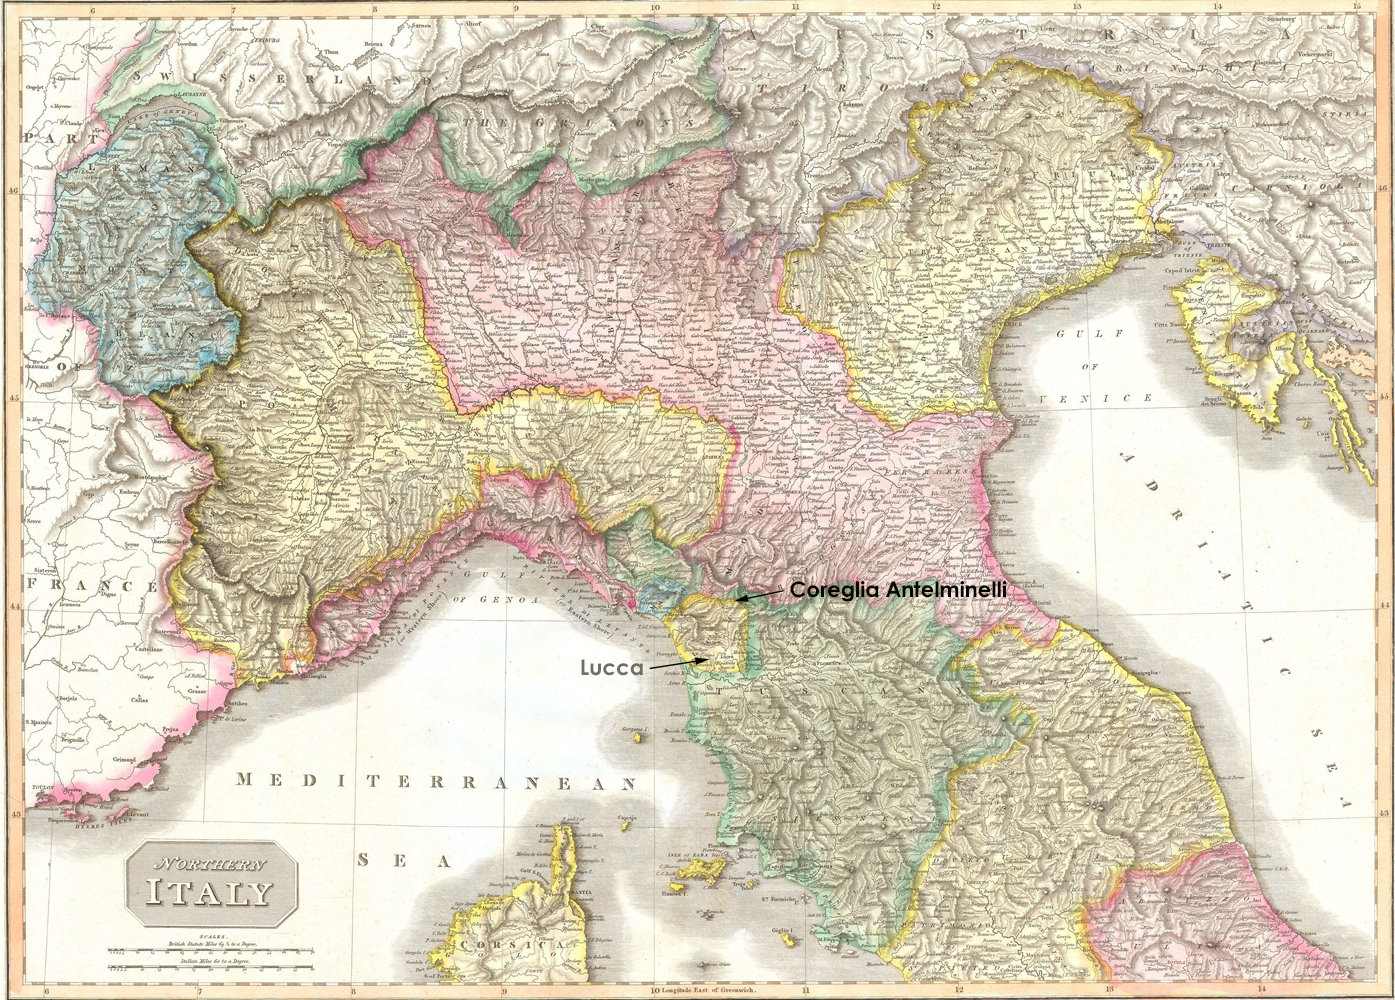 Section of map of north west Italy showing position of Lucca and Coreglia Antelminelli